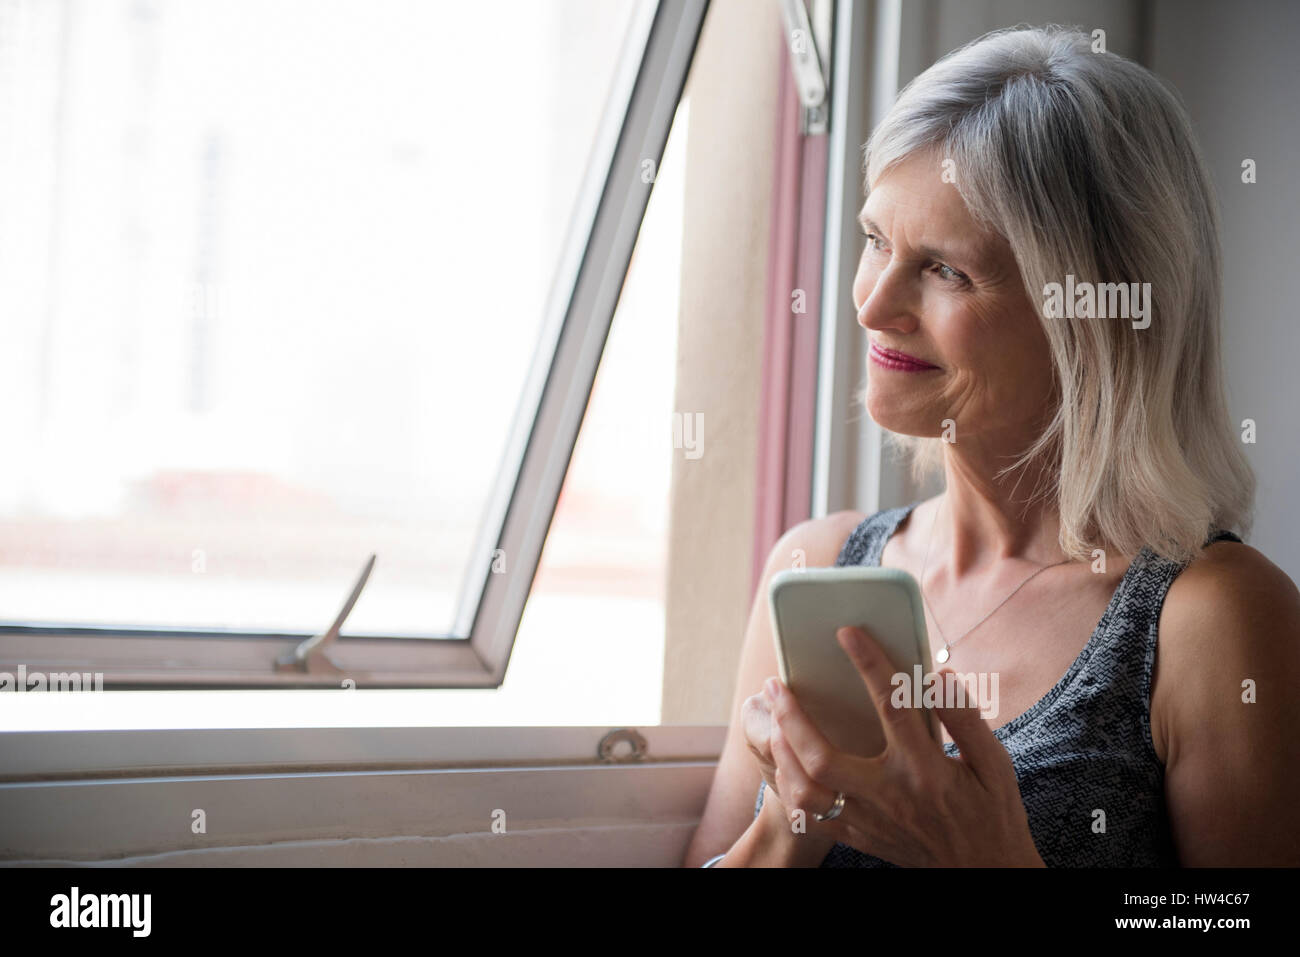 Smiling Caucasian woman texting on cell phone near window Stock Photo